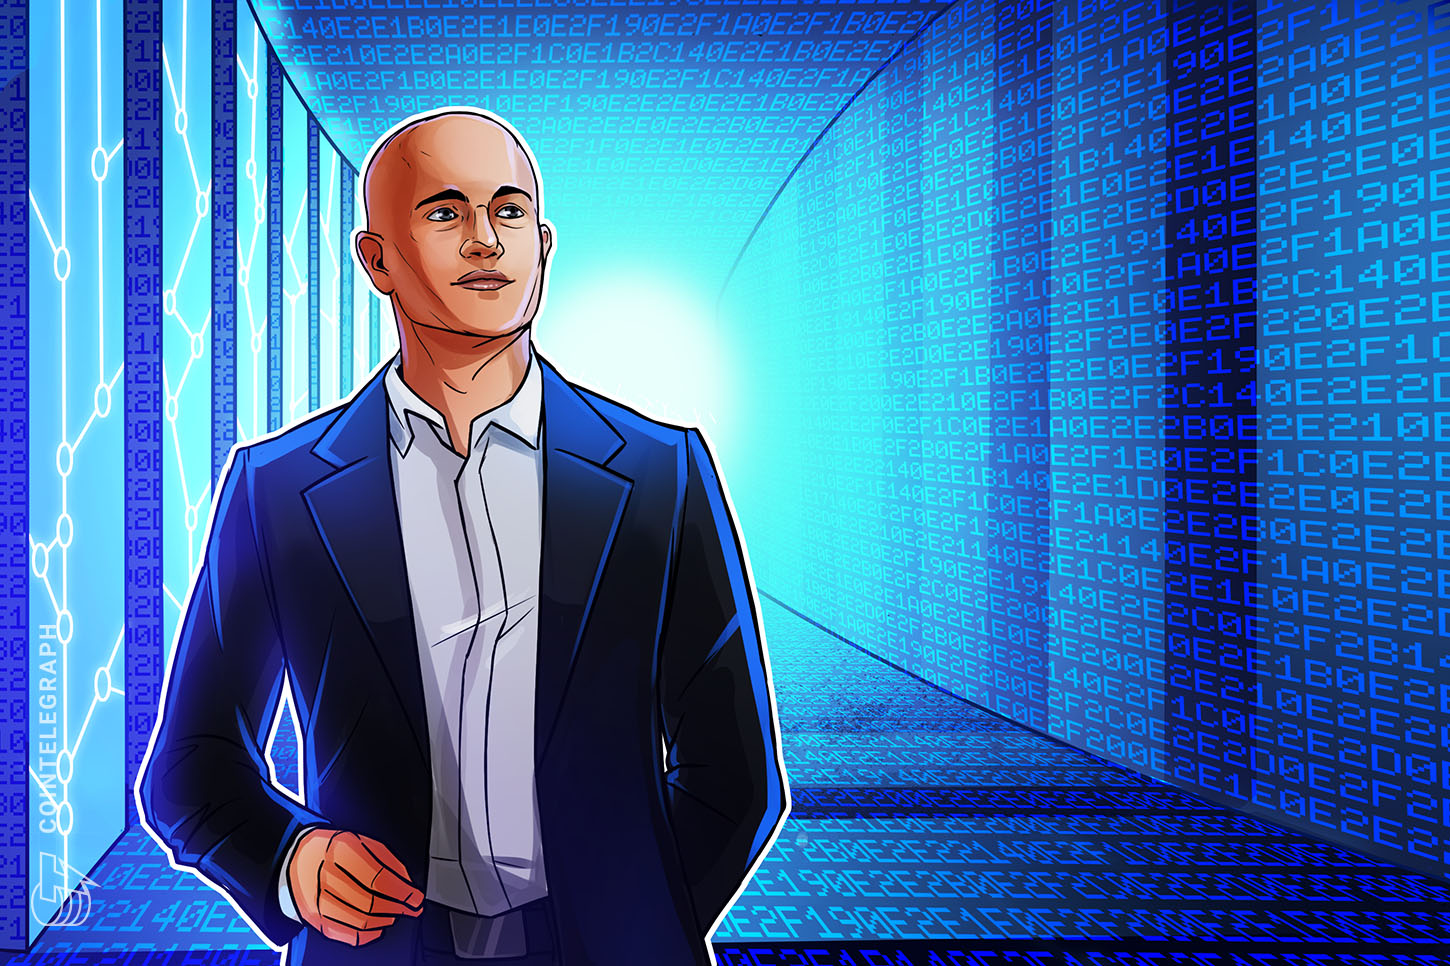 Coinbase CEO prompts livid accusations of hypocrisy as he pushes political misinformation